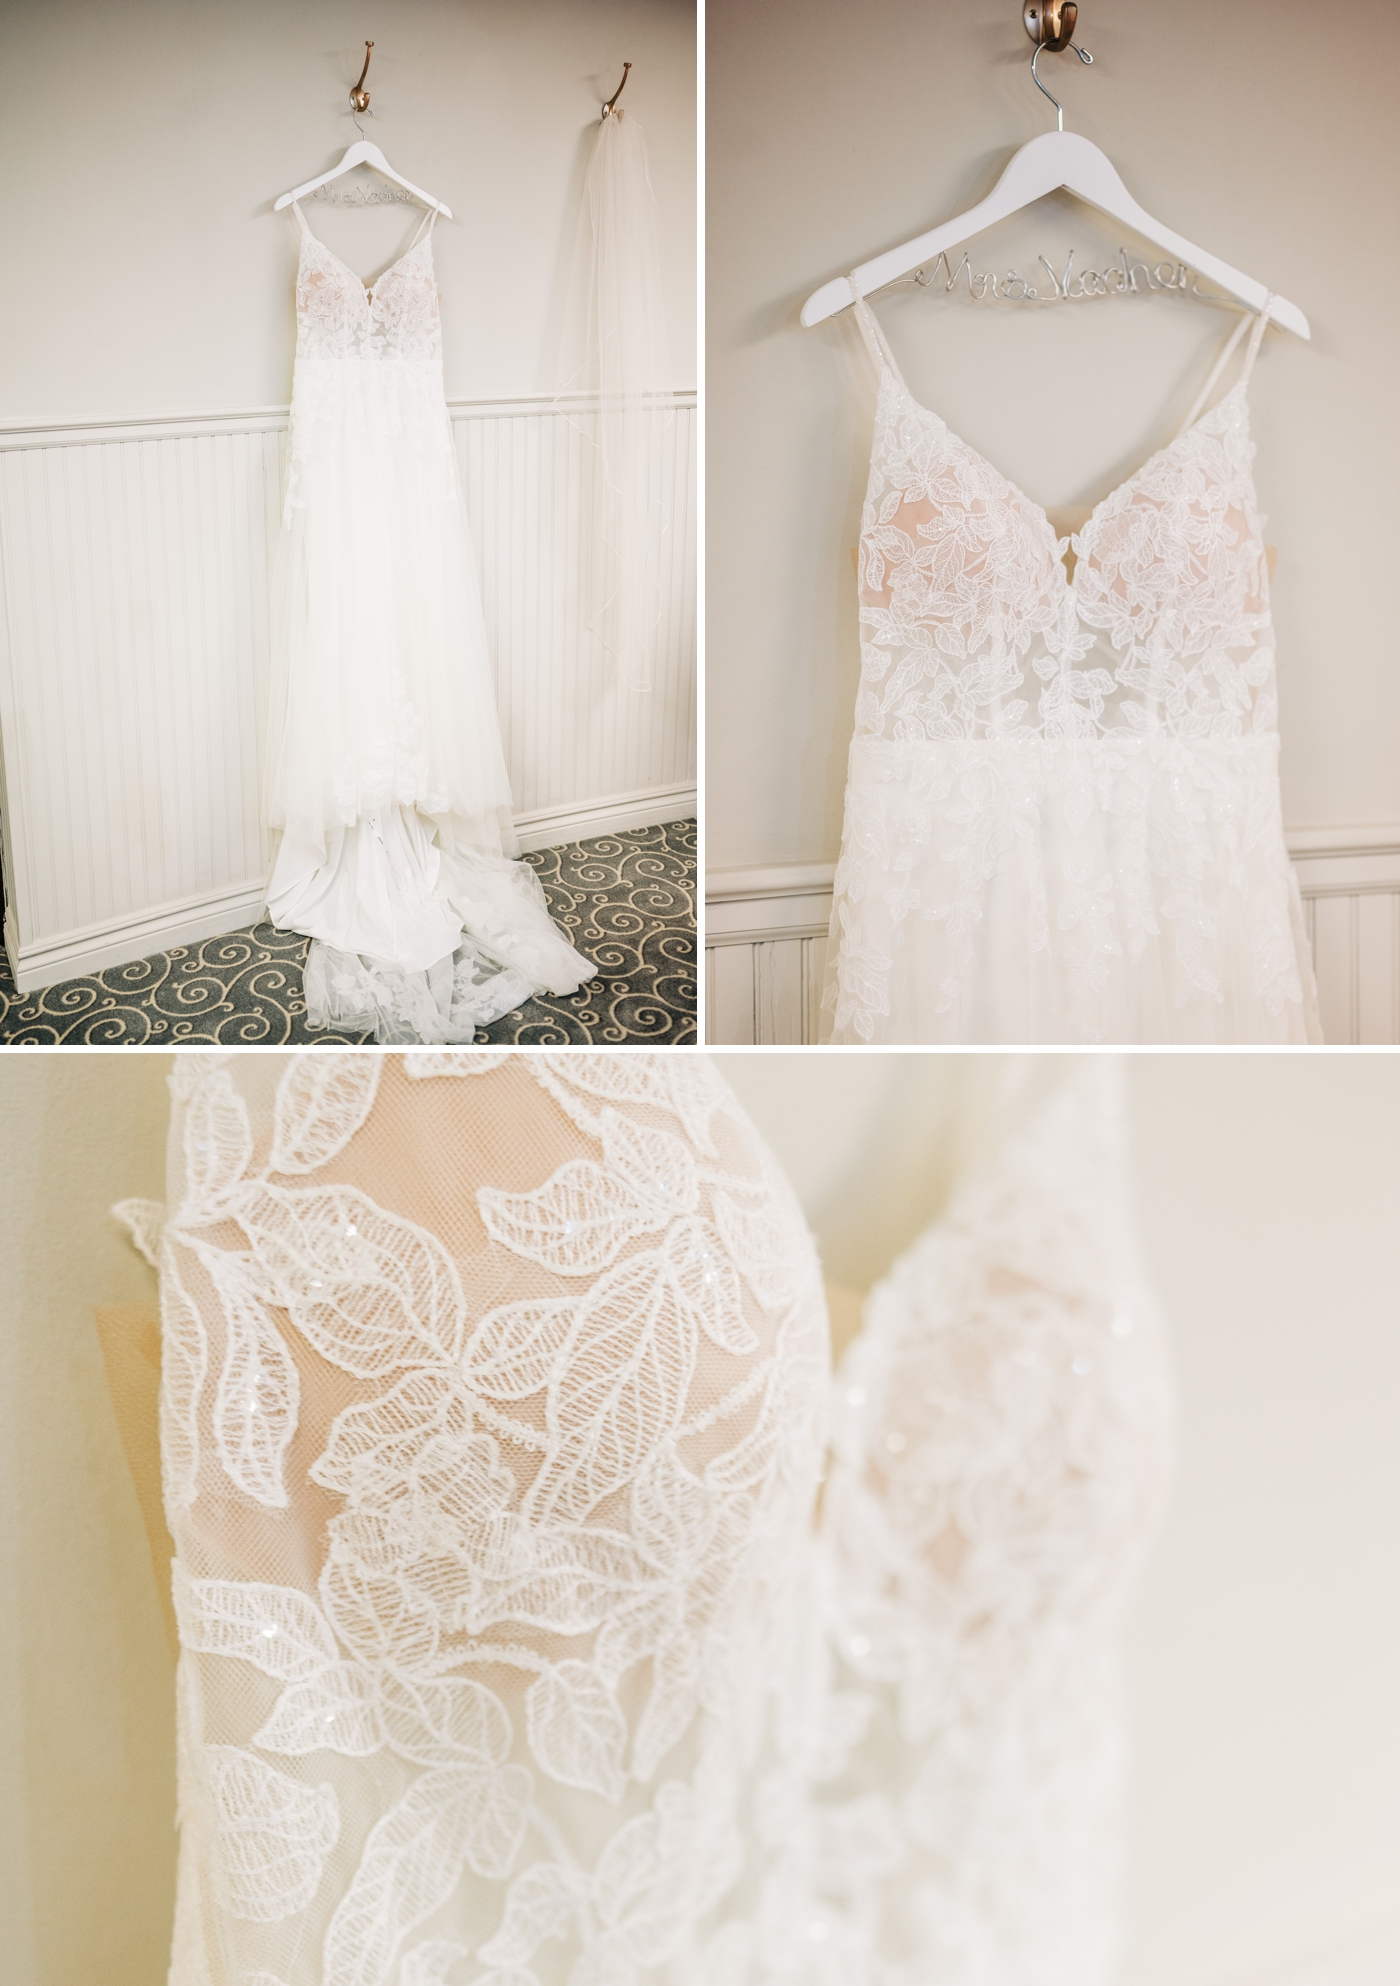 Wedding gown photo with close up of lace bodice details